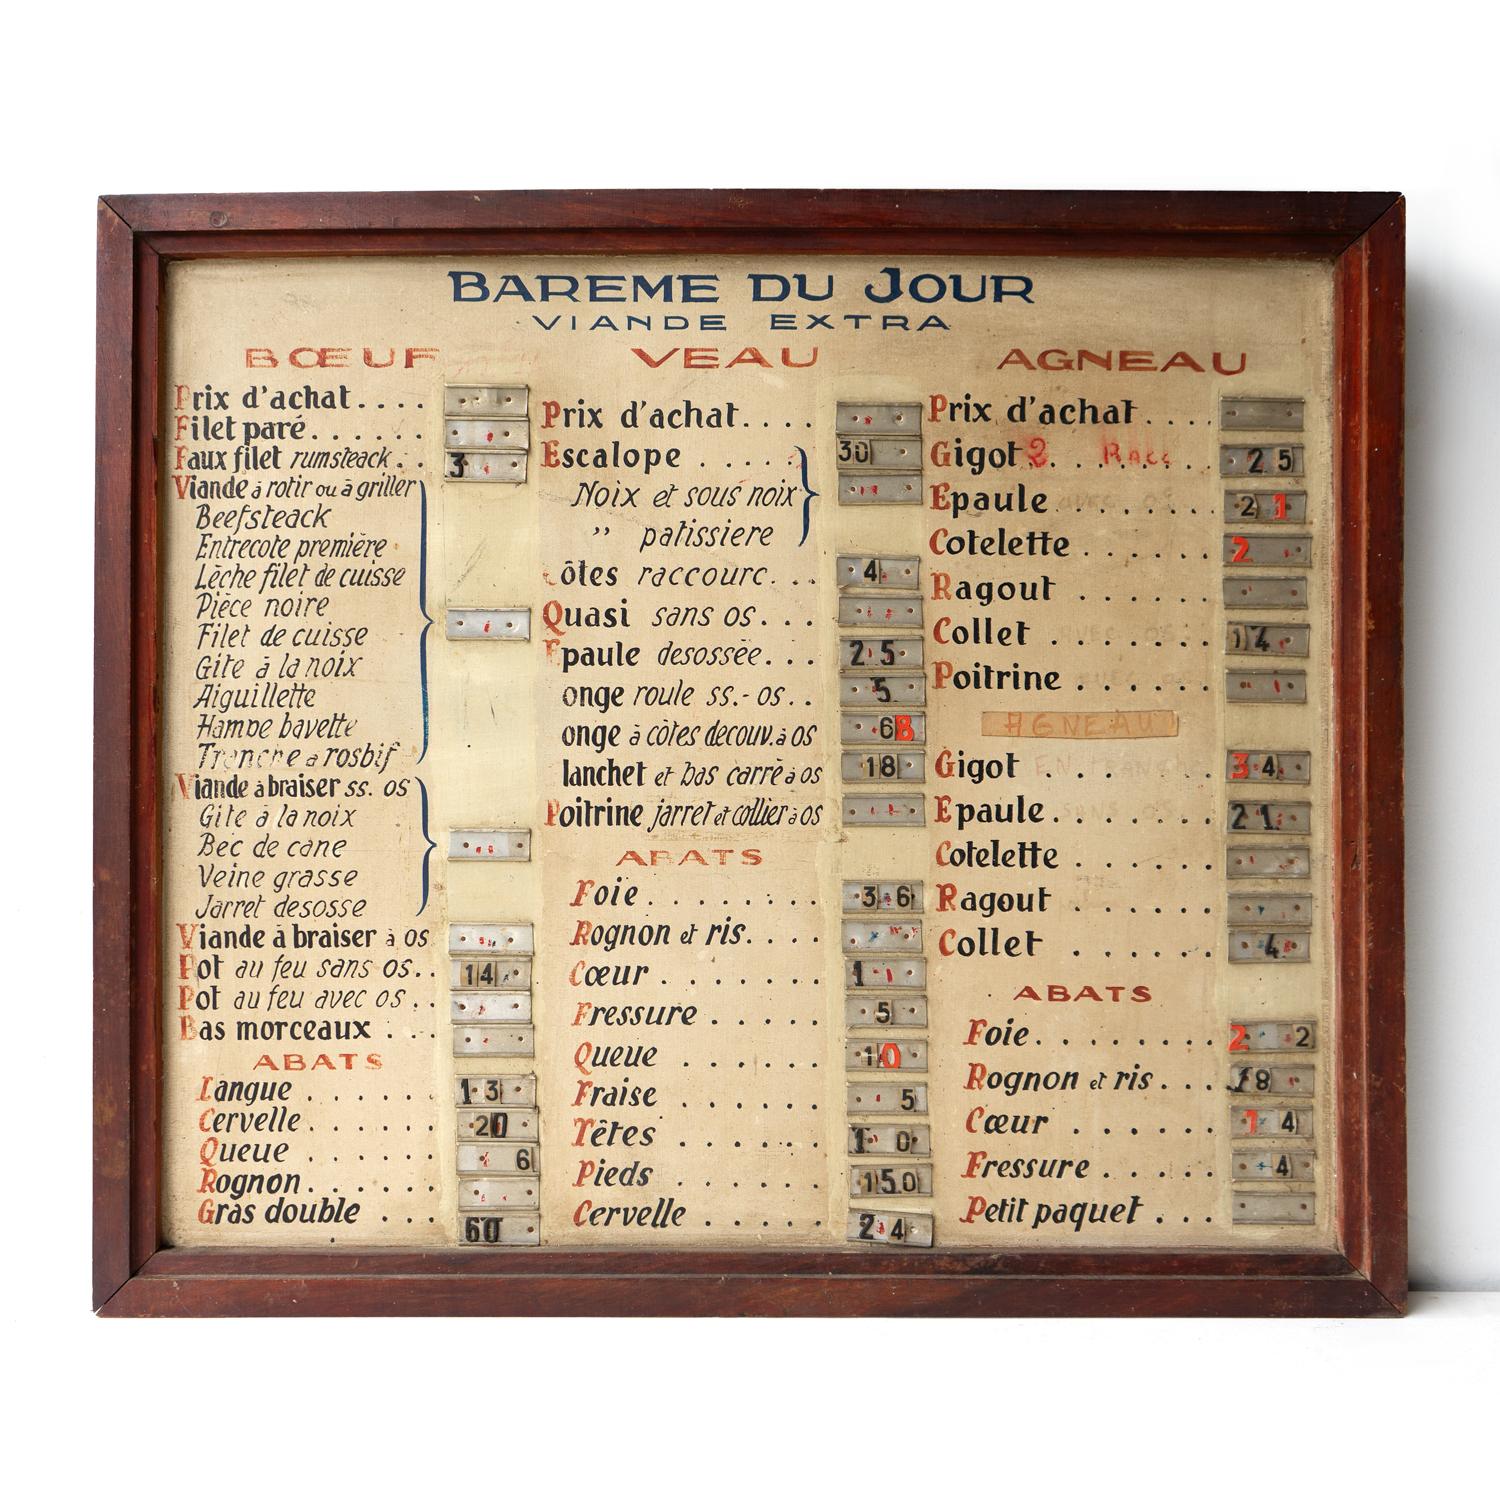 ANTIQUE FRENCH WALL HANGING SIGN

Originally from a French butcher’s shop (Boucherie).

Detailing the different cuts of meat available and their daily price.

Hand-painted on a wooden panel with blue, black and red calligraphy on an off-white